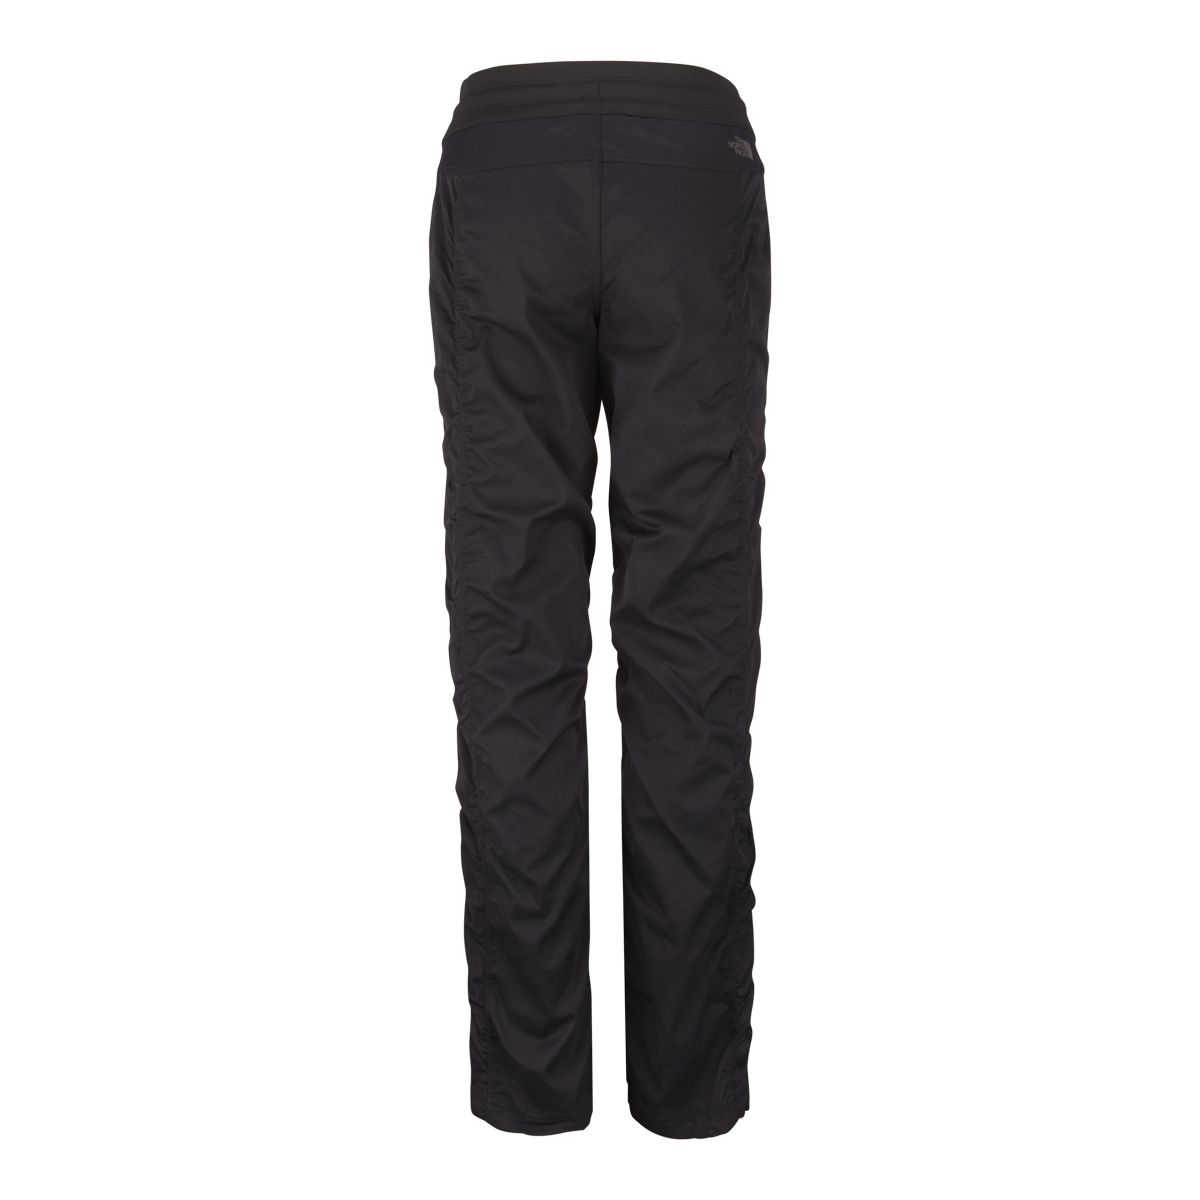 https://media-www.atmosphere.ca/product/div-03-softgoods/dpt-72-casual-clothing/sdpt-02-womens/332247381/tnf-w-aphrodite-2-0-pant-s19-tnf-black-xs--4c151de5-0d16-4a33-8225-a63991a06629-jpgrendition.jpg?imdensity=1&imwidth=1244&impolicy=mZoom